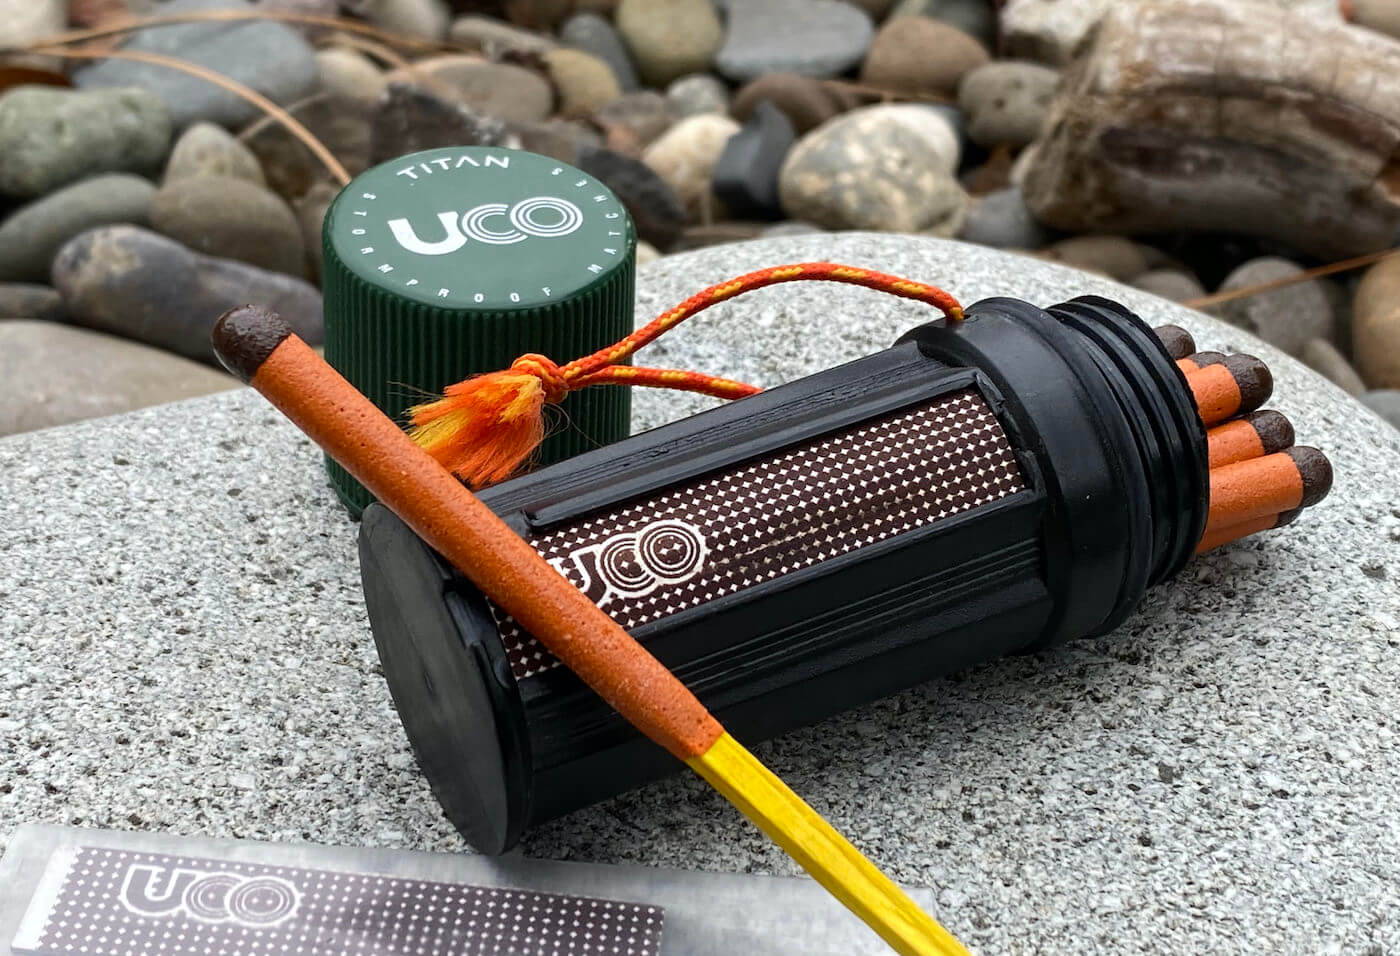 This camping stocking stuffer gift photo shows a waterproof match kit.